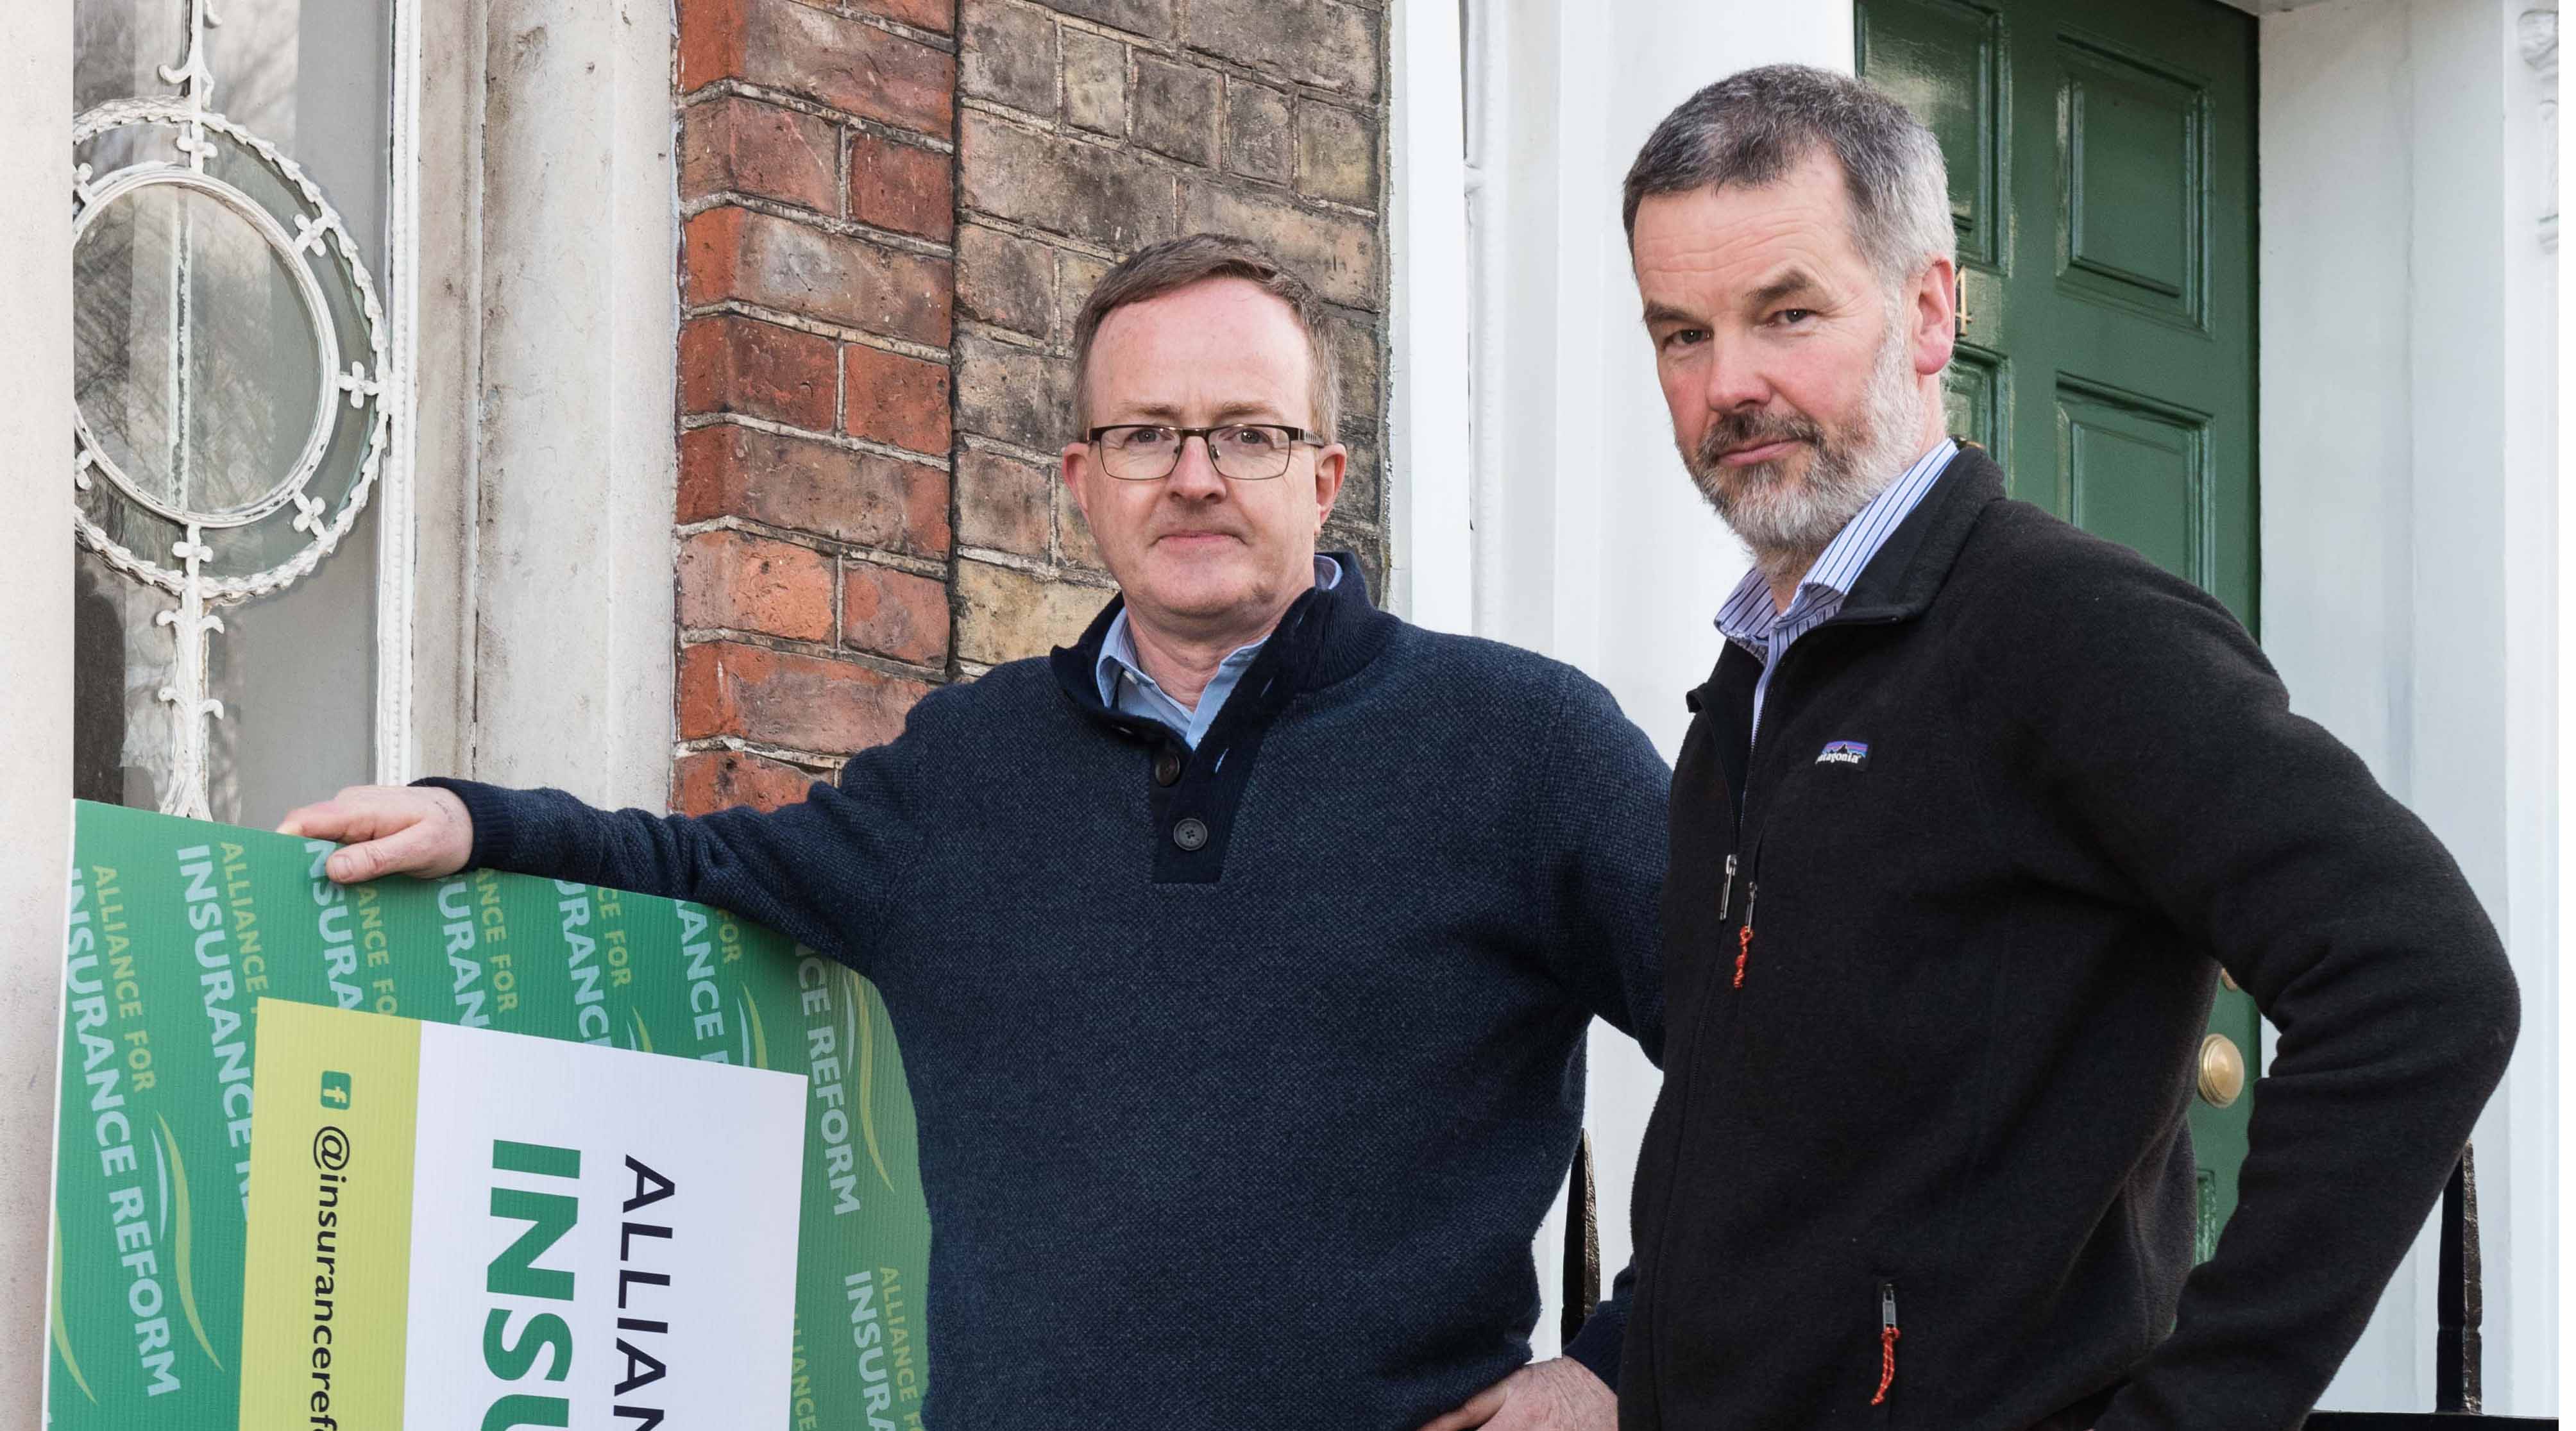 "The government needs to show backbone in taking on these sectors to project jobs and services across the country," urged Alliance spokesman Peter Boland (seen here on left with Alliance Committee member Eoin McCambridge of McCambridges's, Galway).